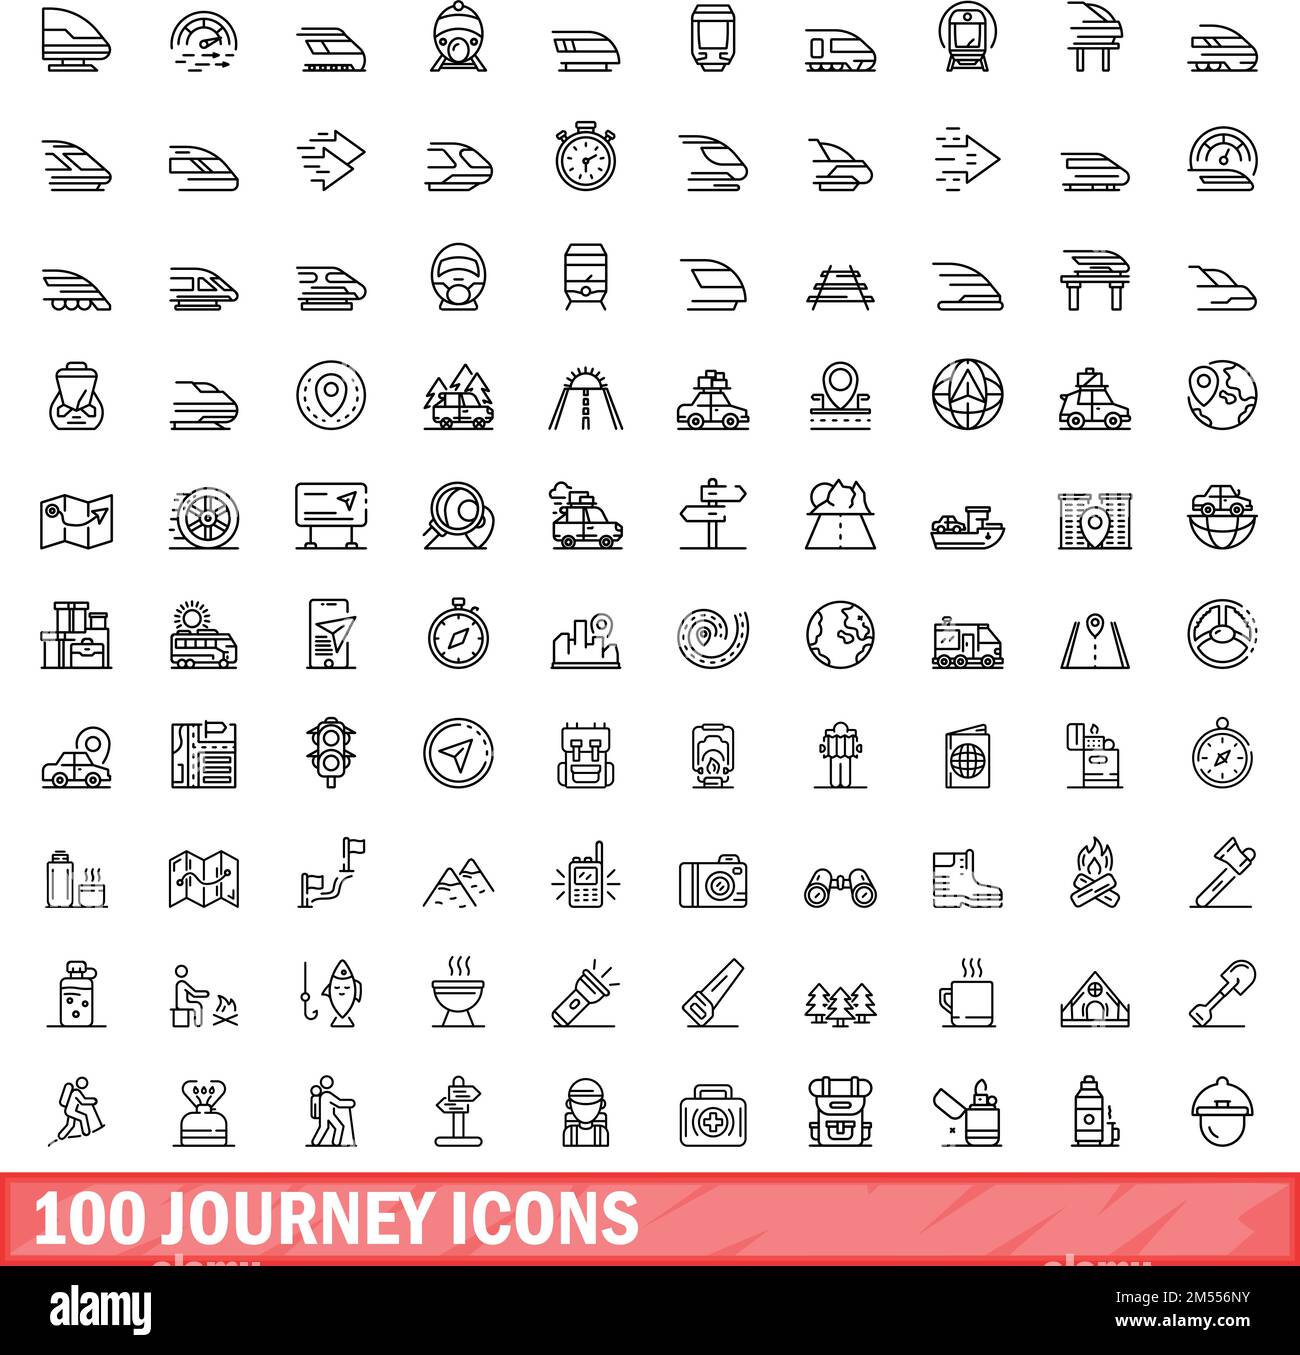 100 journey icons set. Outline illustration of 100 journey icons vector set isolated on white background Stock Vector